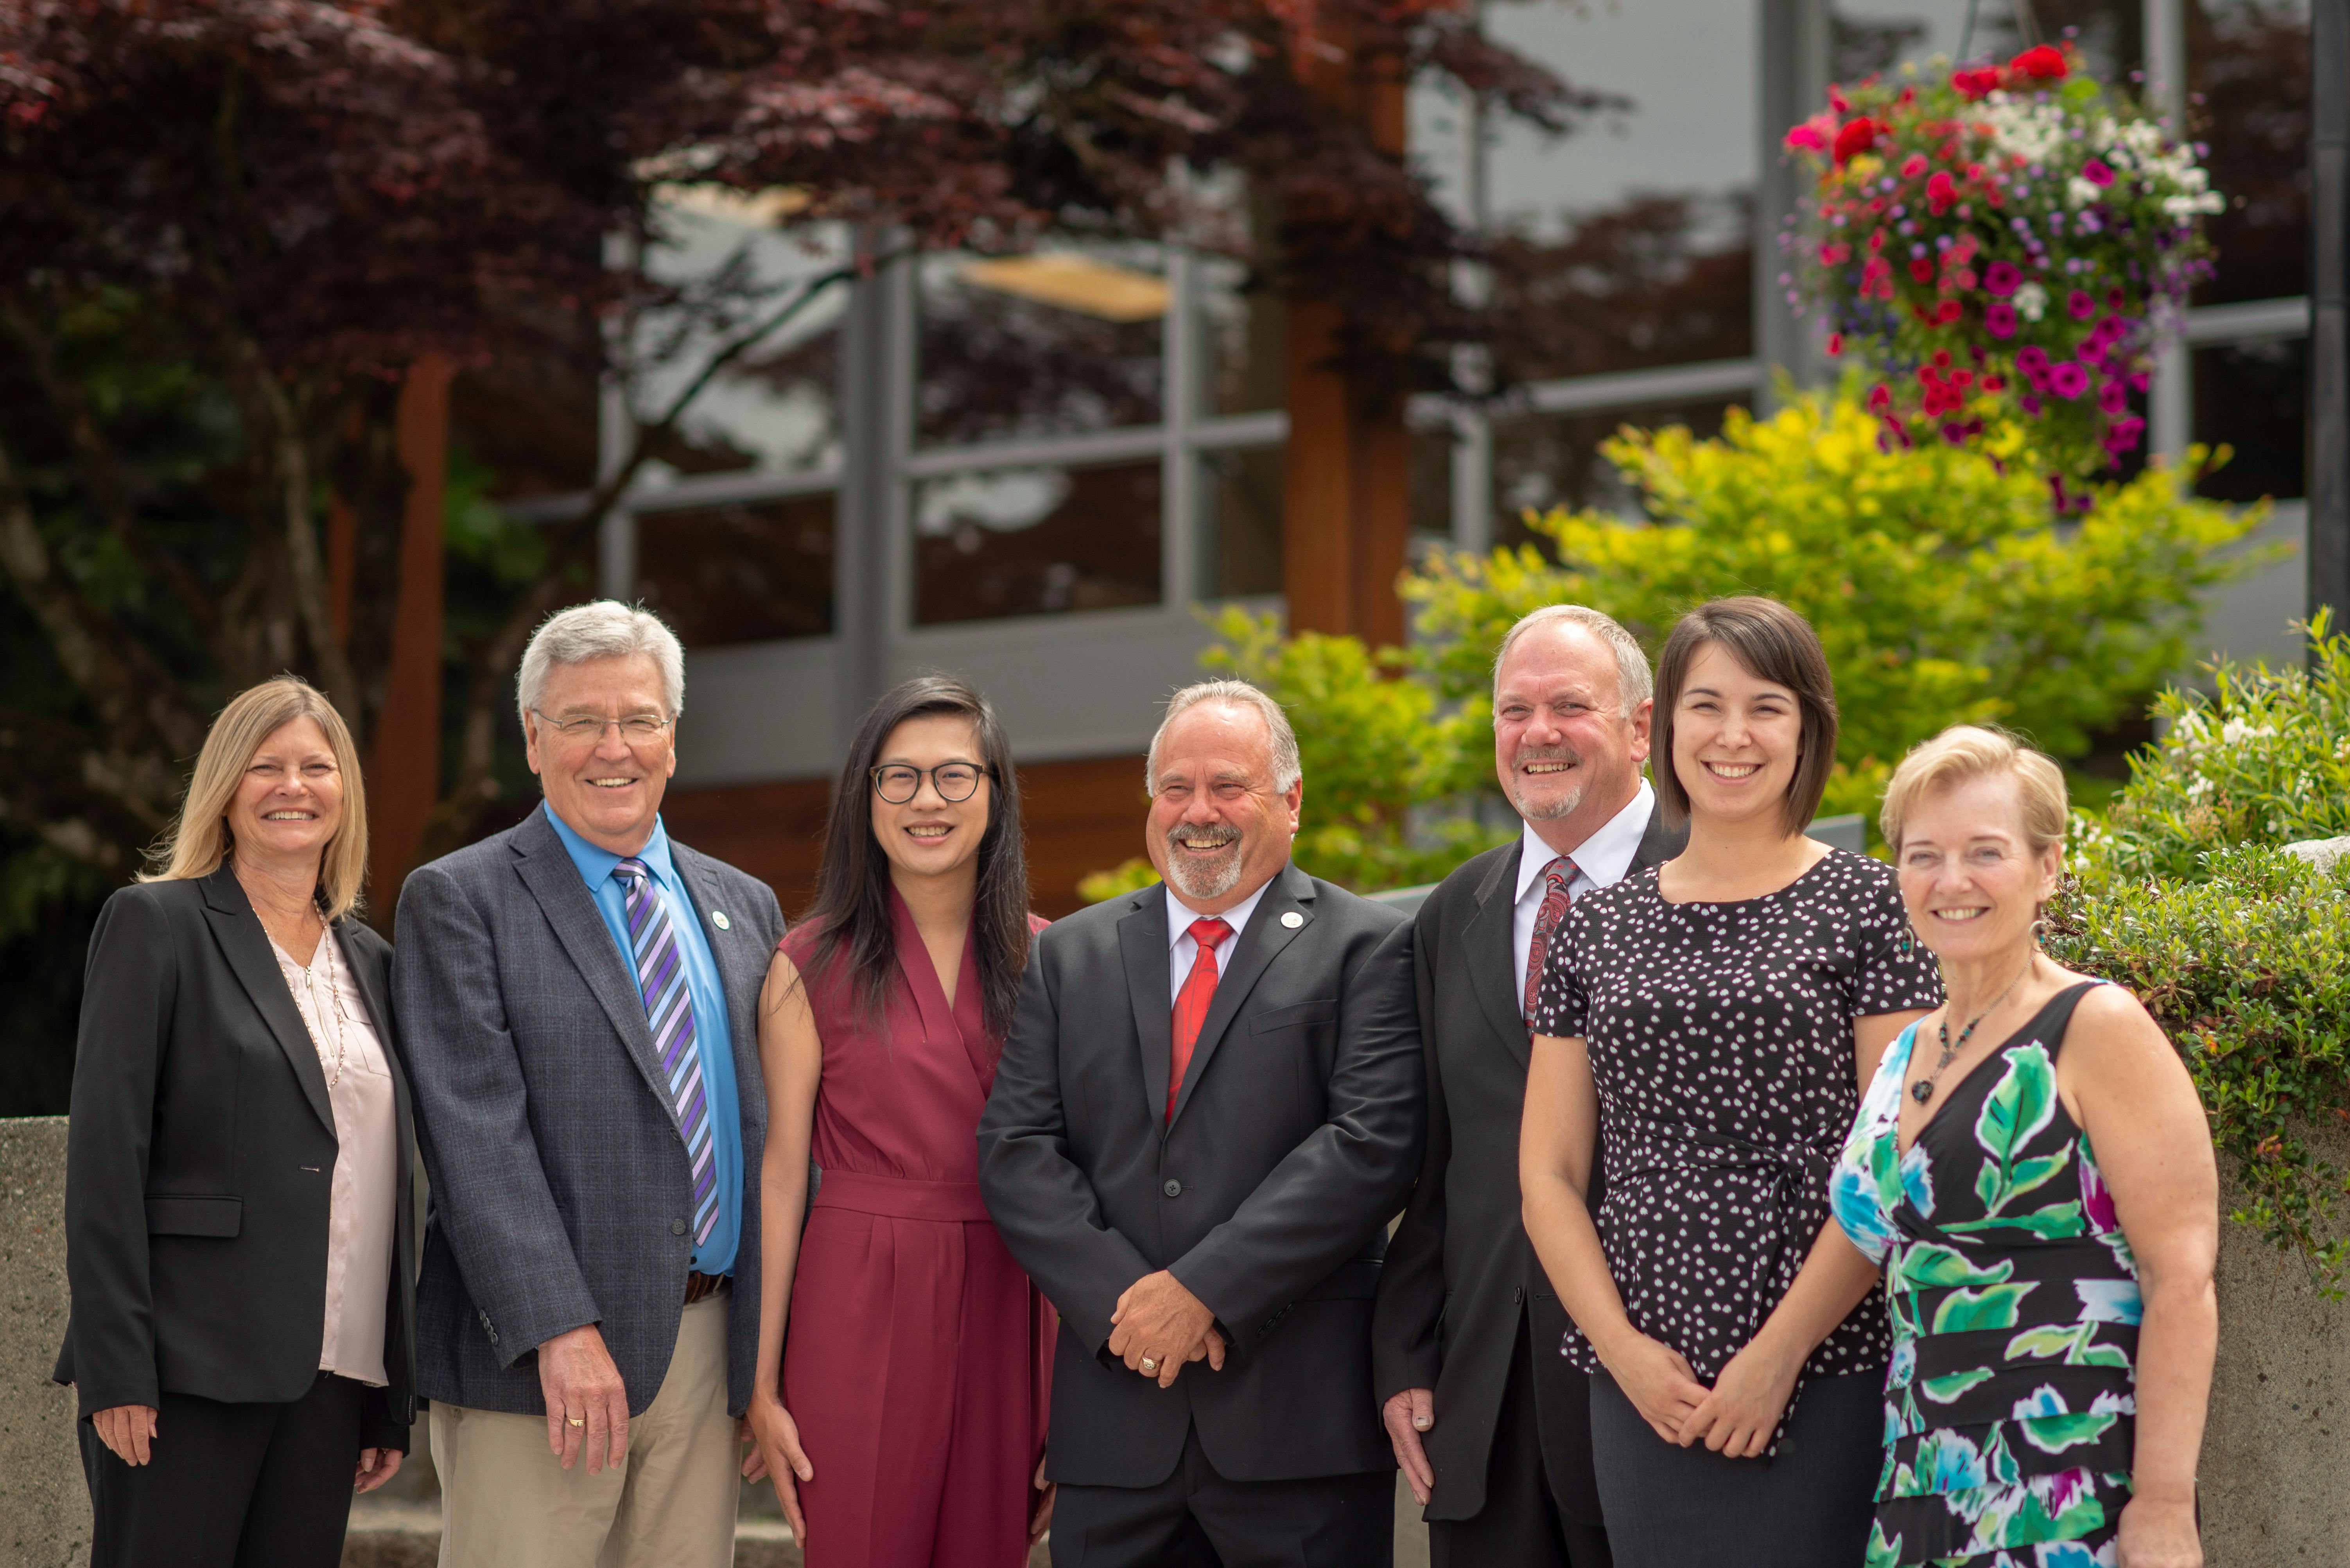 Council Outside of City hall - June 2019.JPG